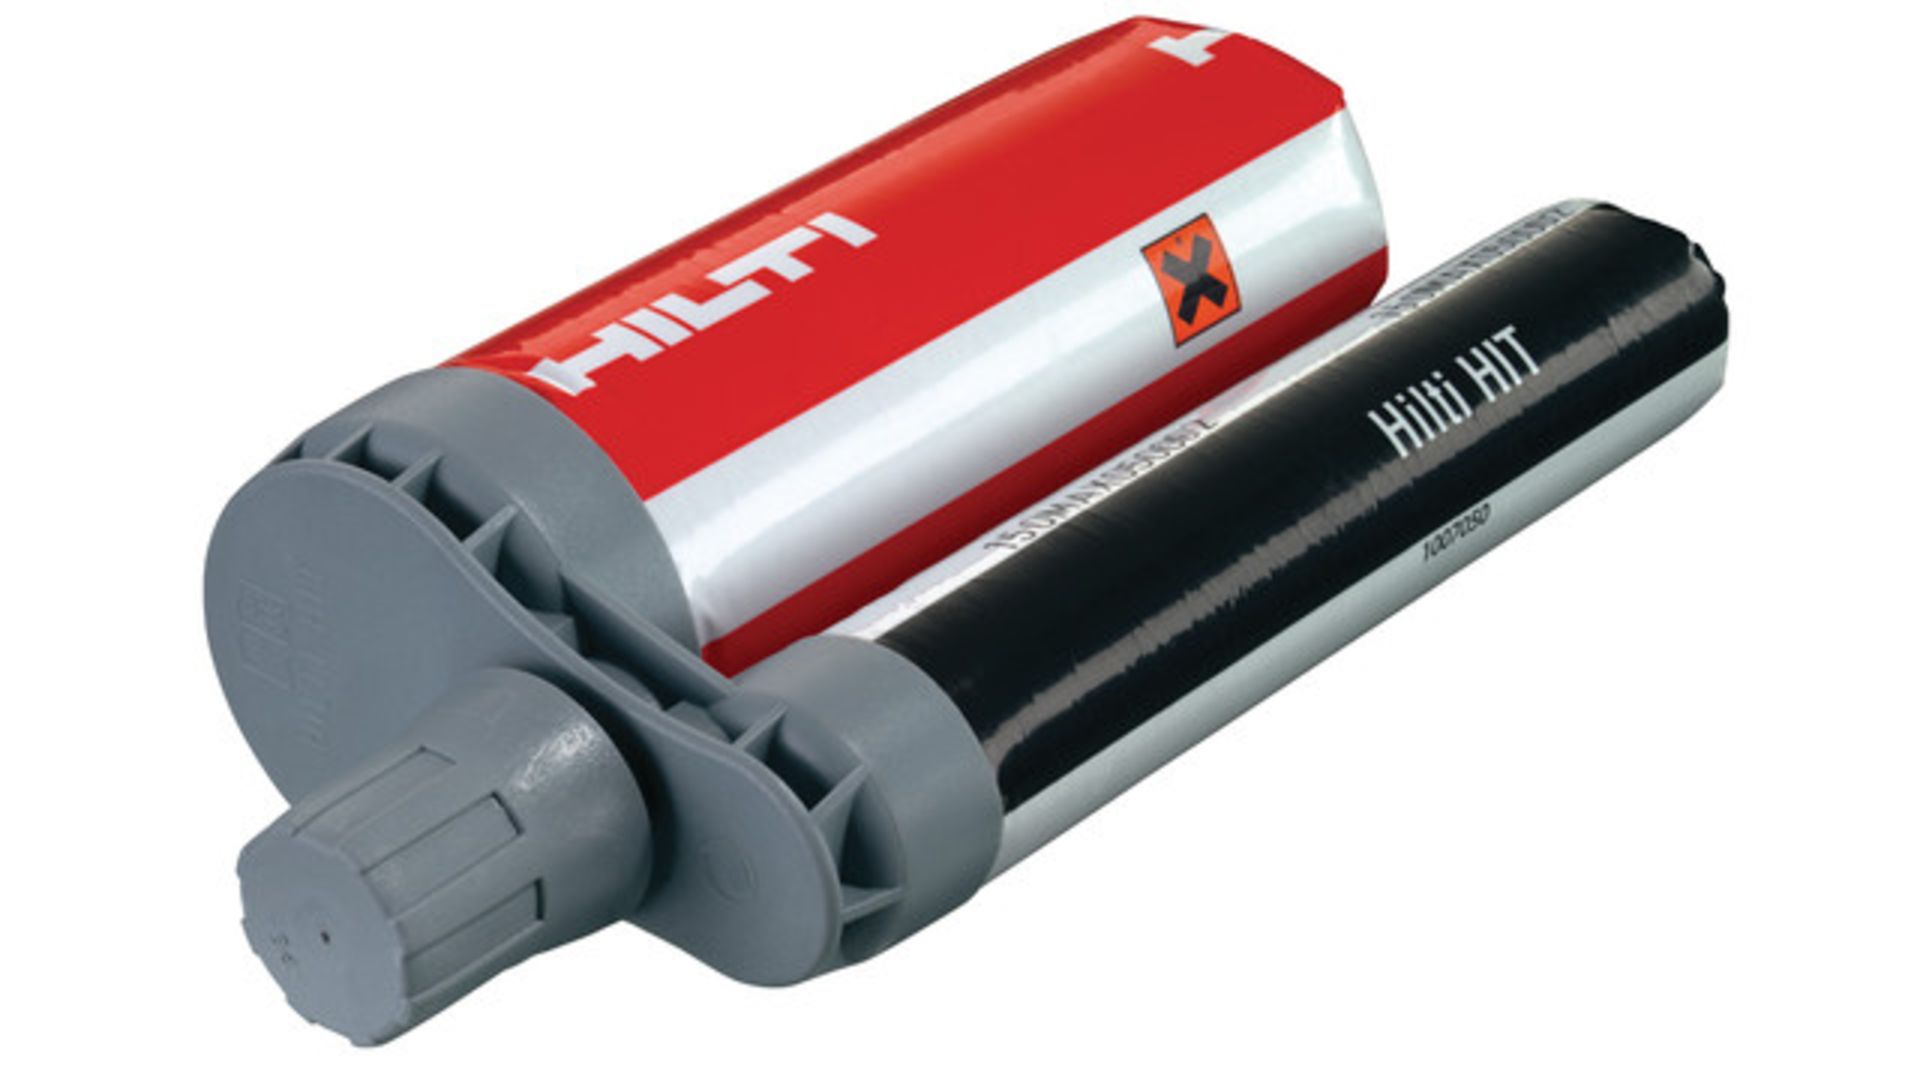 15 x Hilti HIT-HY 150 Adhesive Anchor - 330ml - Product Code 315960 - Unused Packs - CL300 - Ref